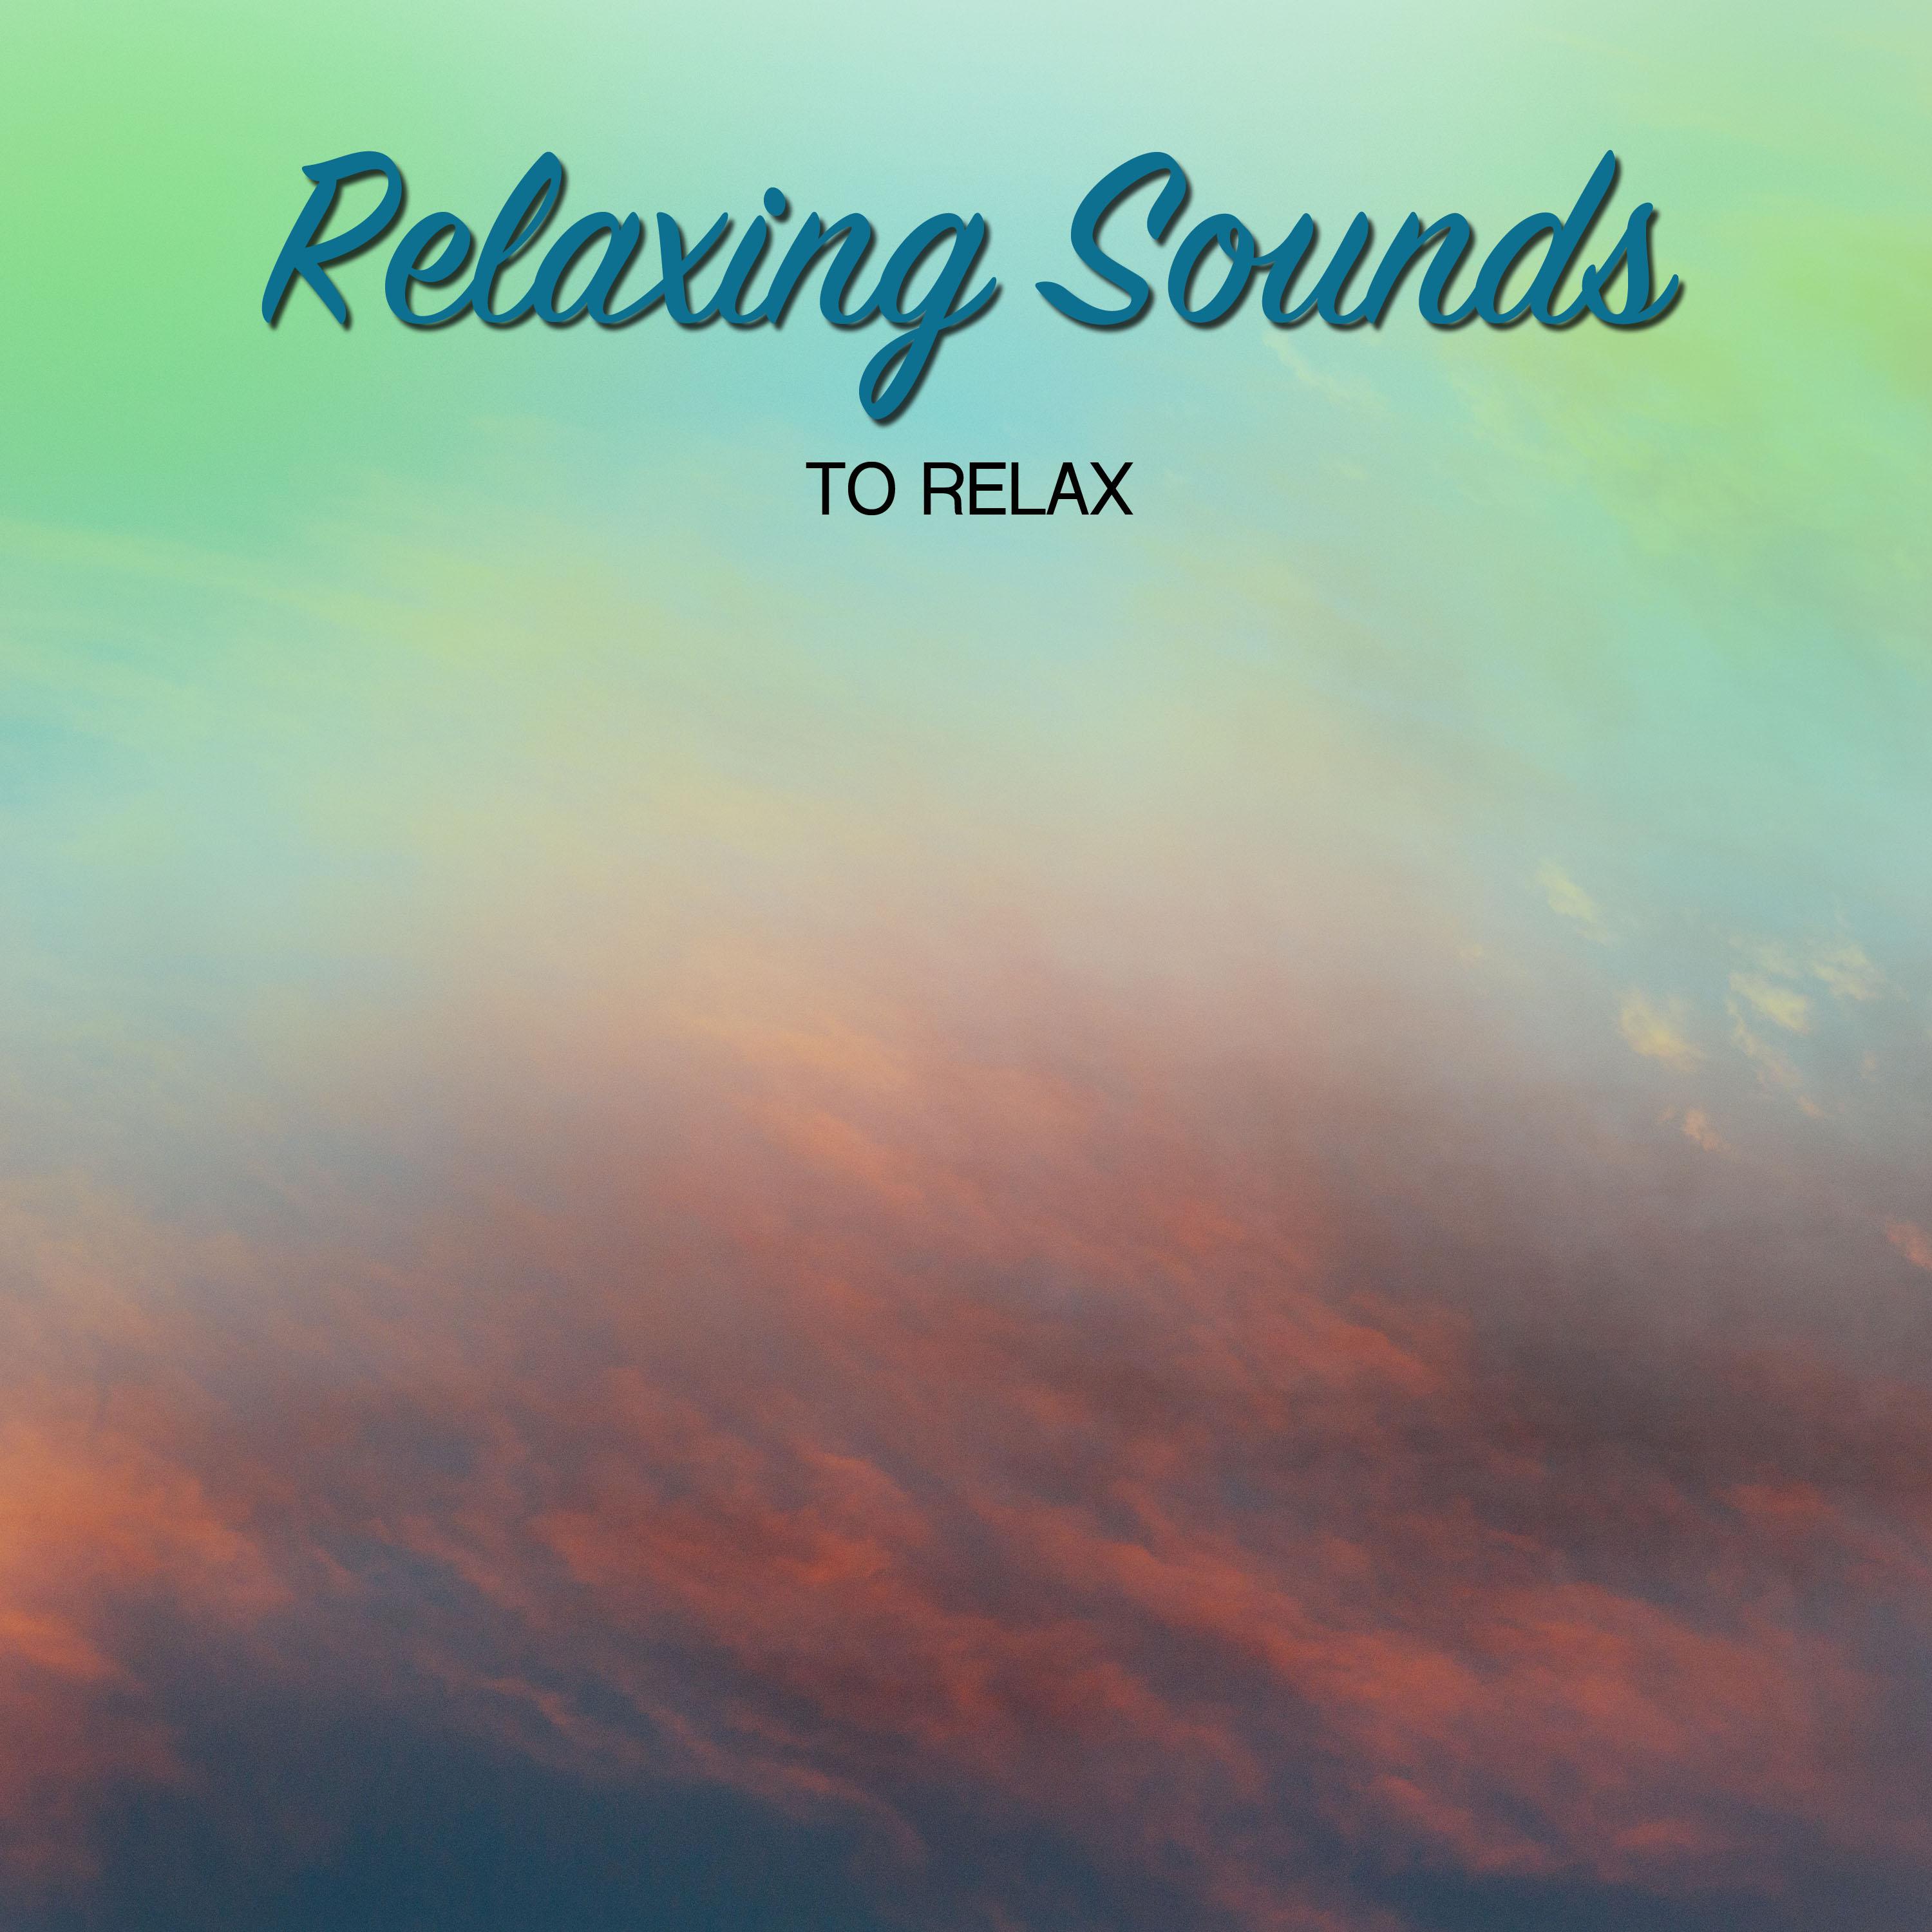 22 Relaxing Sounds to Relax